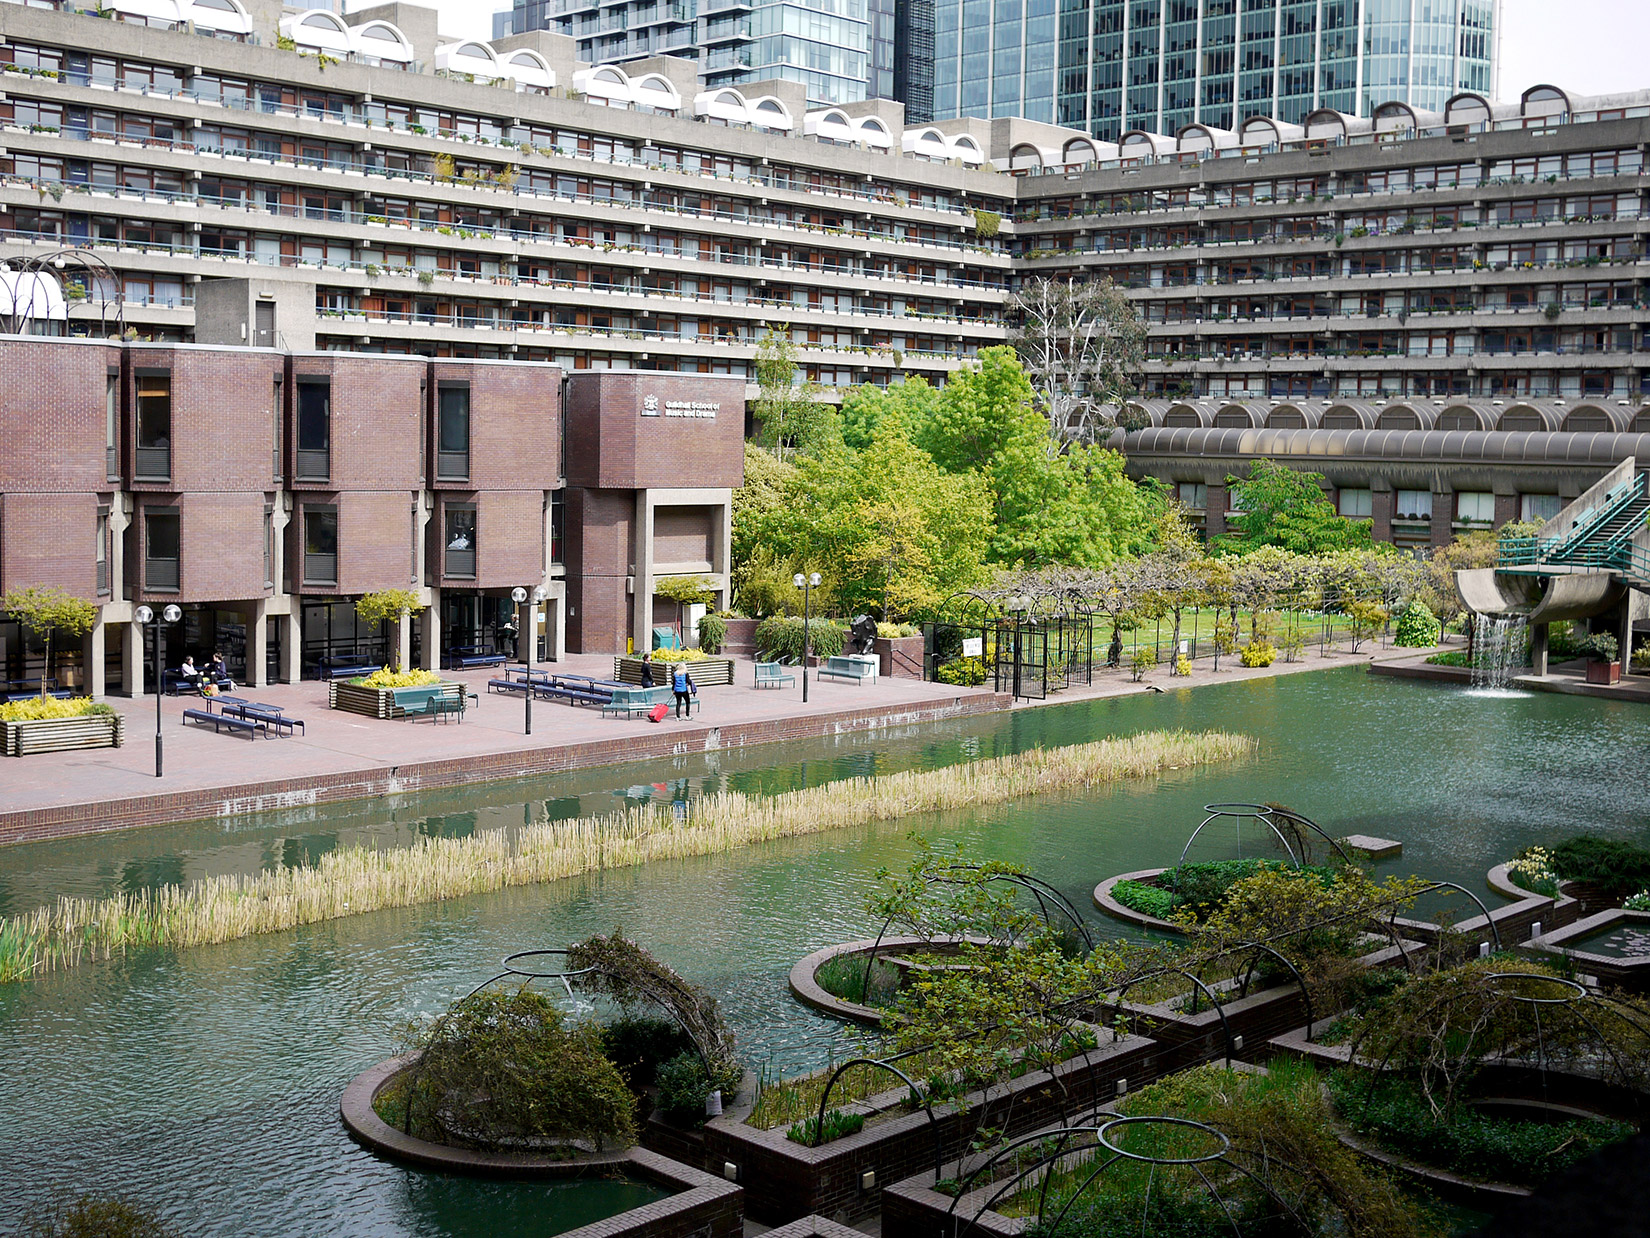 lead-image-Barbican,-This-Brutal-House.